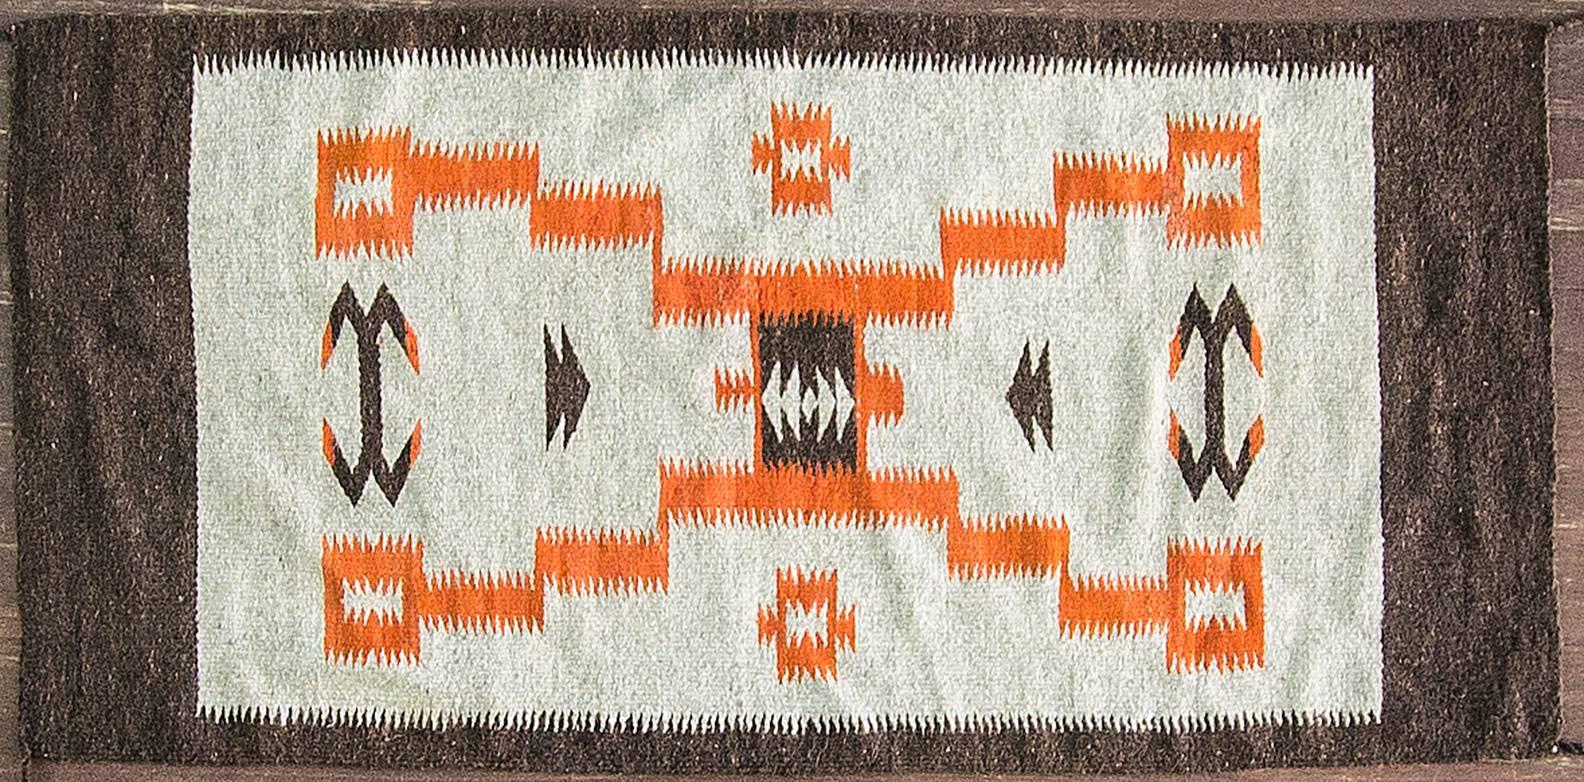 Storm pattern Navajo Rug, c-1930 in excellent condition.
The Storm Pattern is not built around a central diamond, but is a very recognizable geometric composition with a strong, often rectangular central element connected by diagonal stepped lines